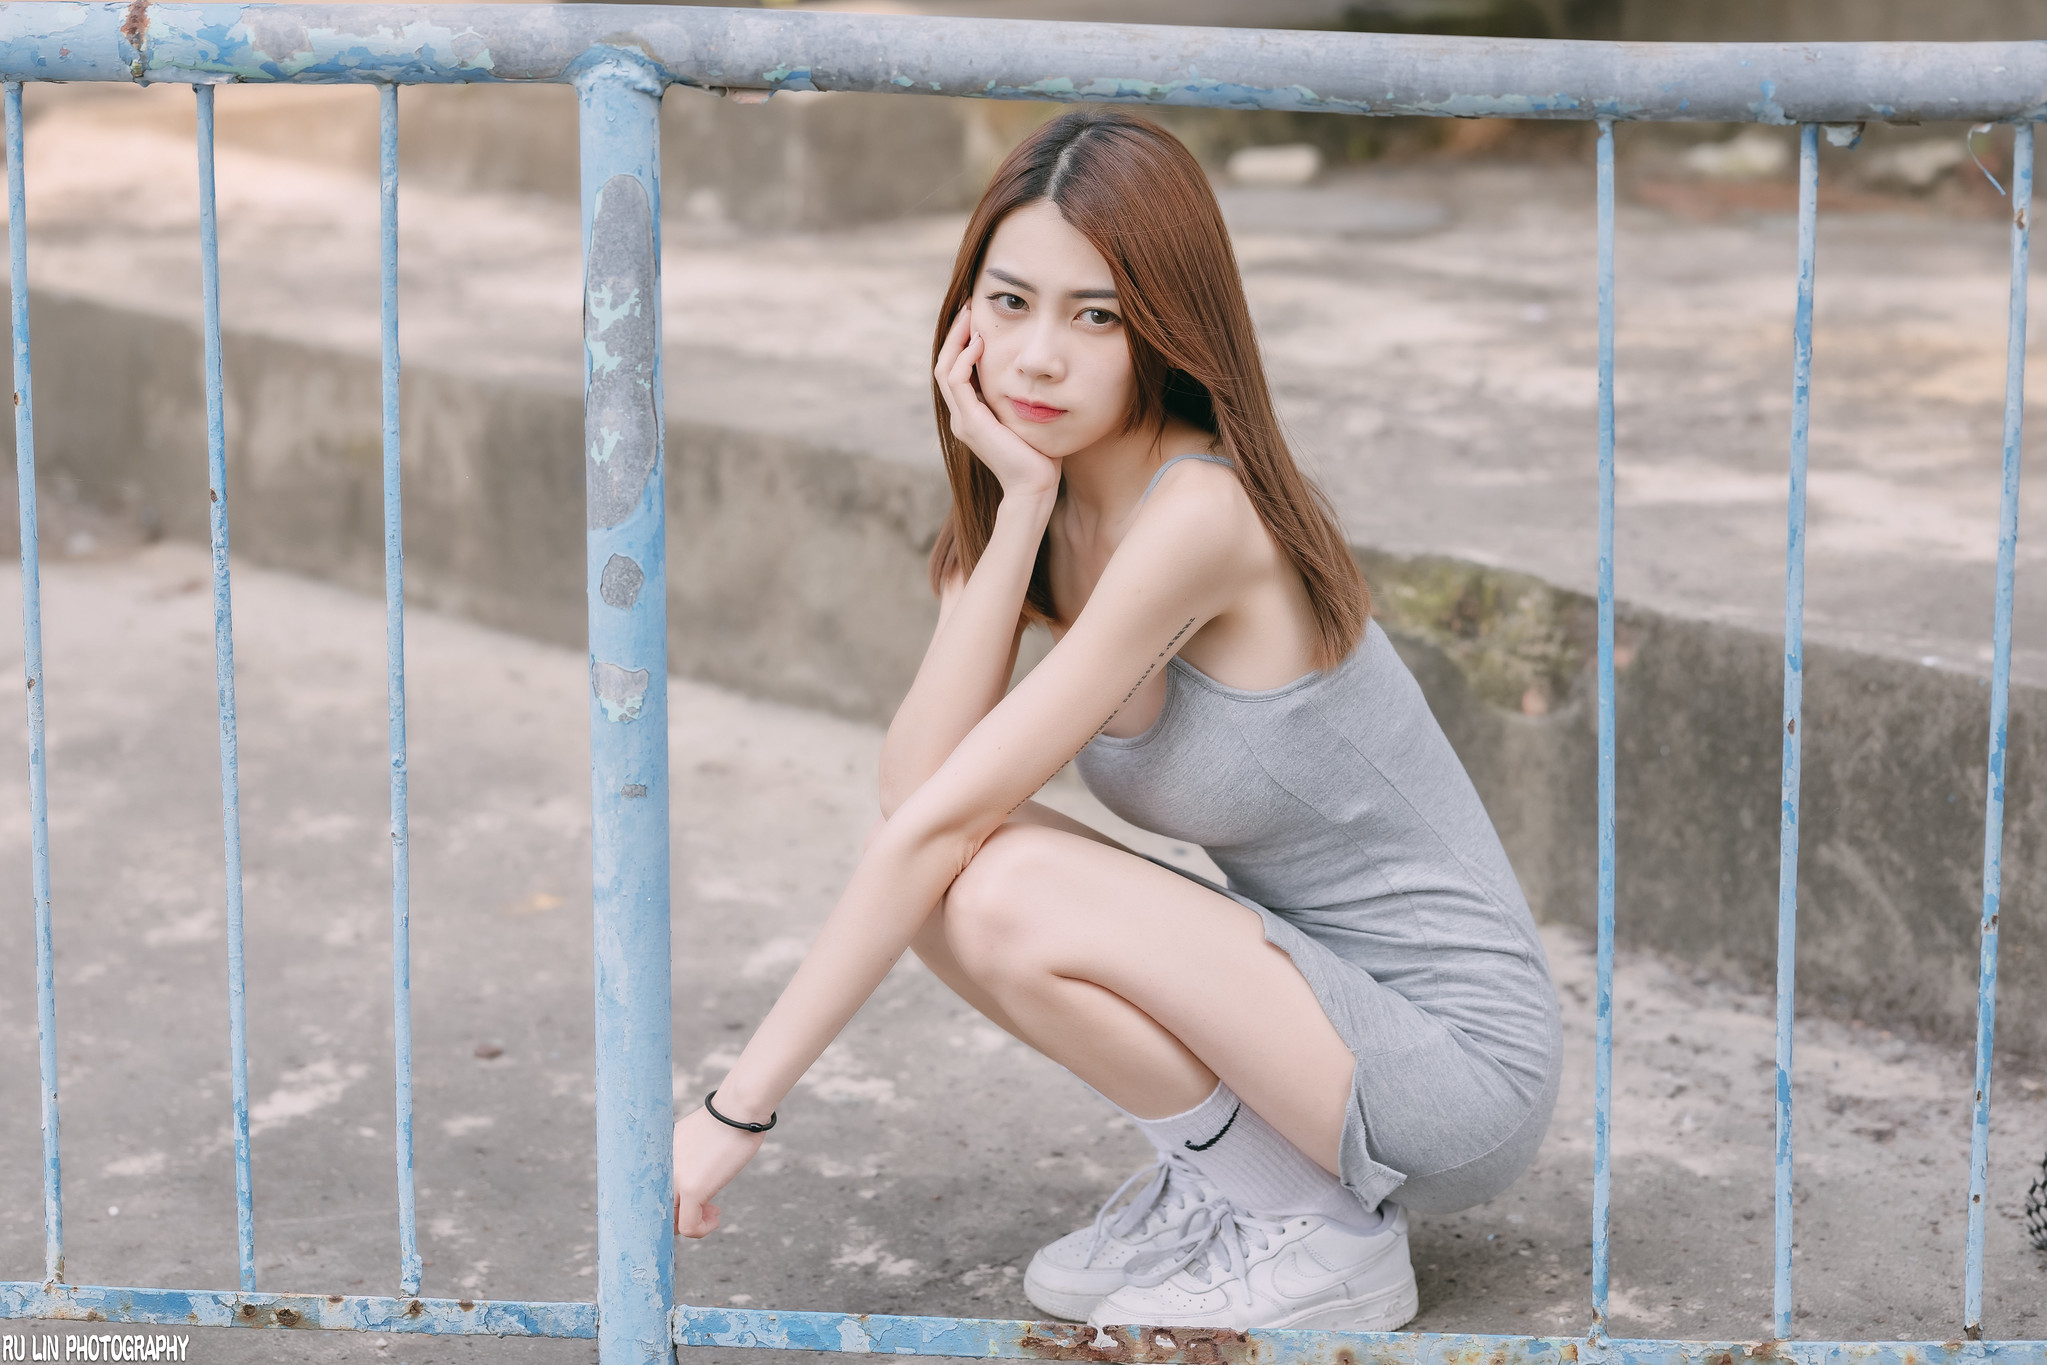 Sexy Funk Pig Women Brunette Long Hair Asian Straight Hair Dress Grey Clothing Sneakers Fence 2047x1365